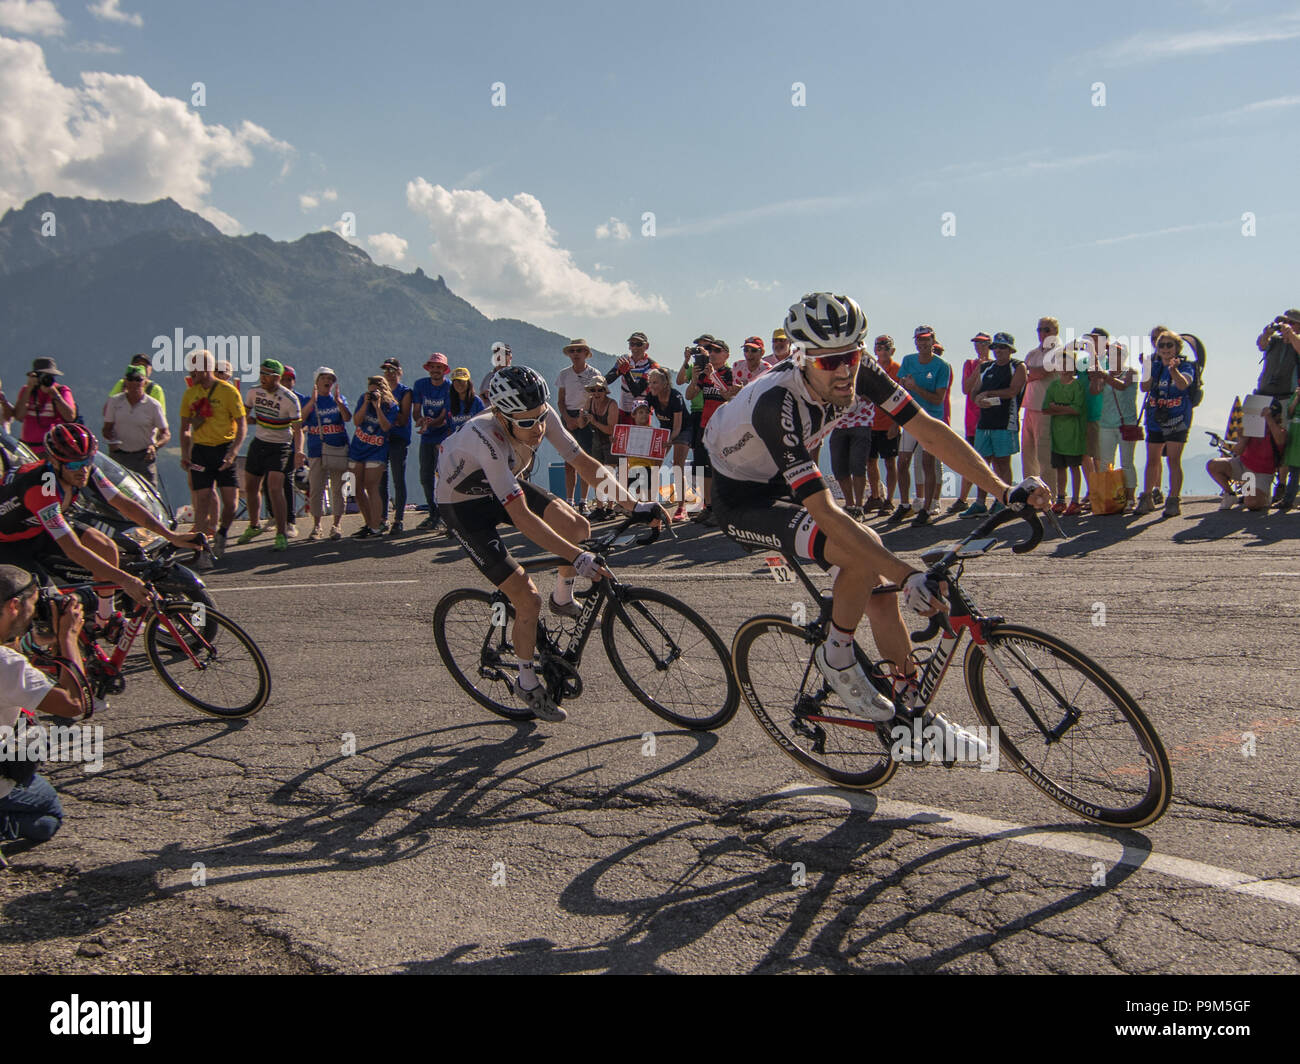 Tom Dumoulin, Geraint Thomas and Damiano Caruso climbing competing in France. 18th July, 2018. Tour de France 2018 cycling stage 11 La Rosiere Rhone Alpes Savoie France Credit: Fabrizio Malisan/Alamy Live News Stock Photo